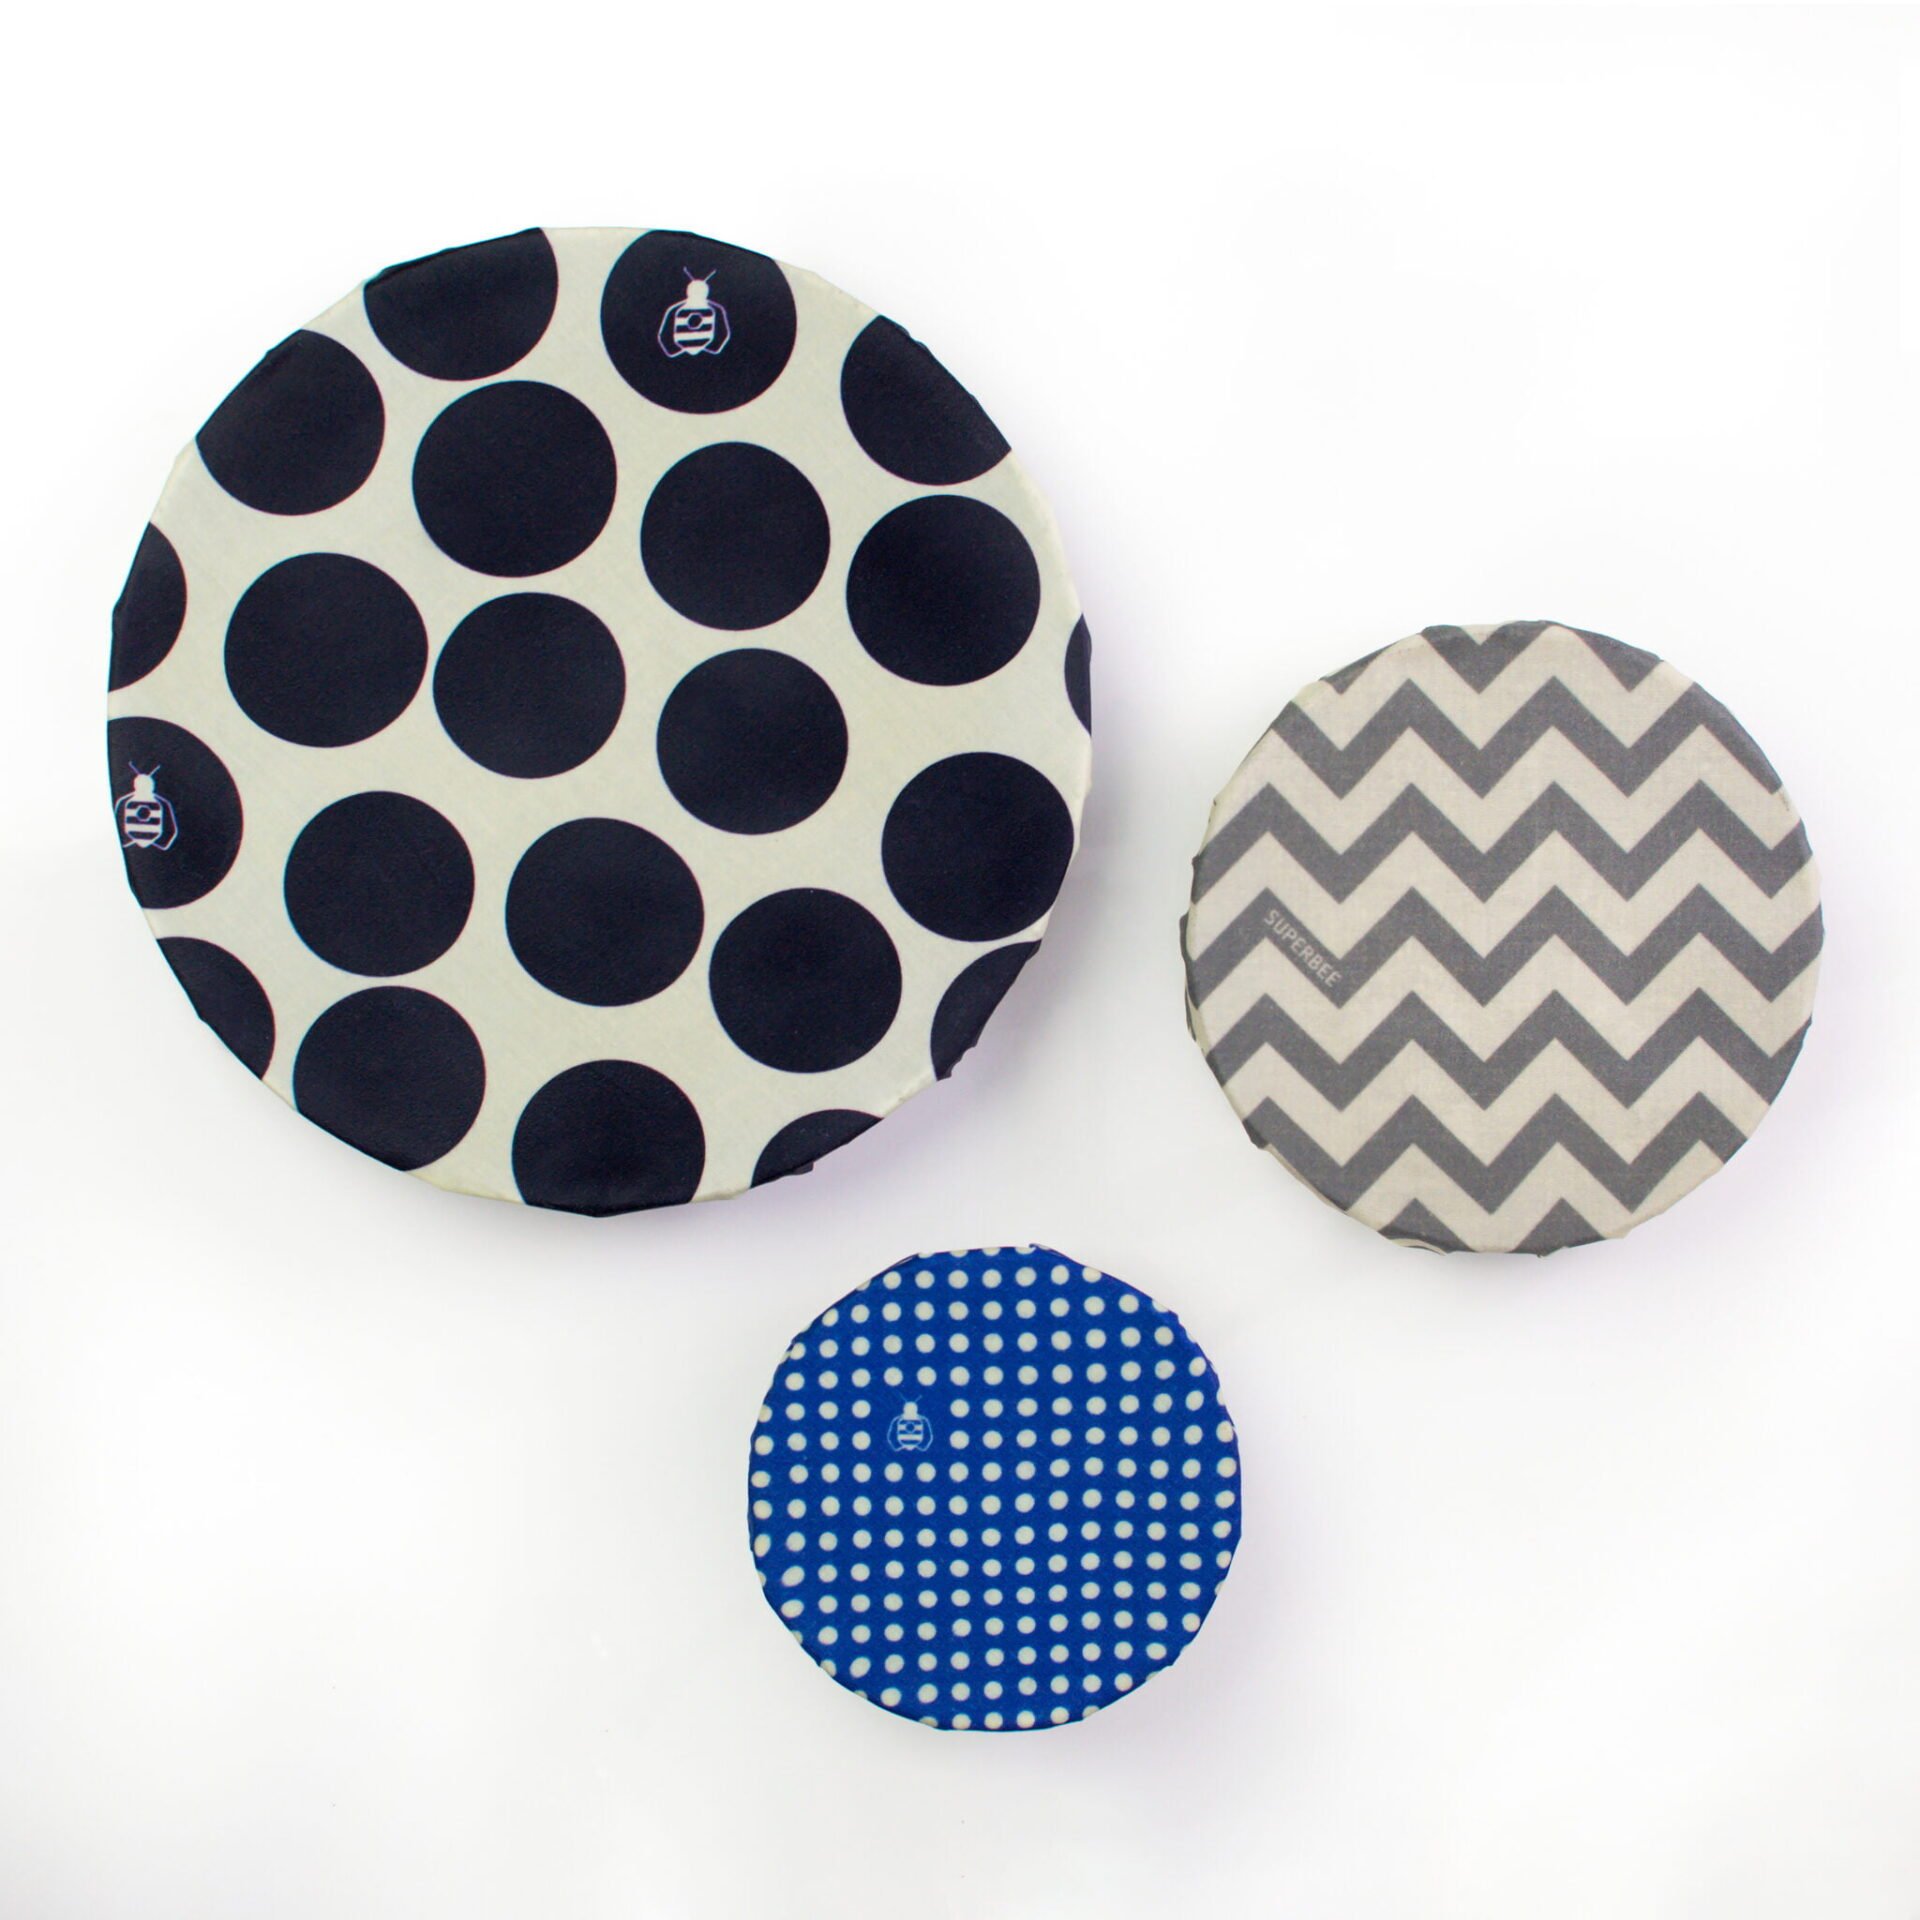 Hipster Beeswax Wraps on Bowls